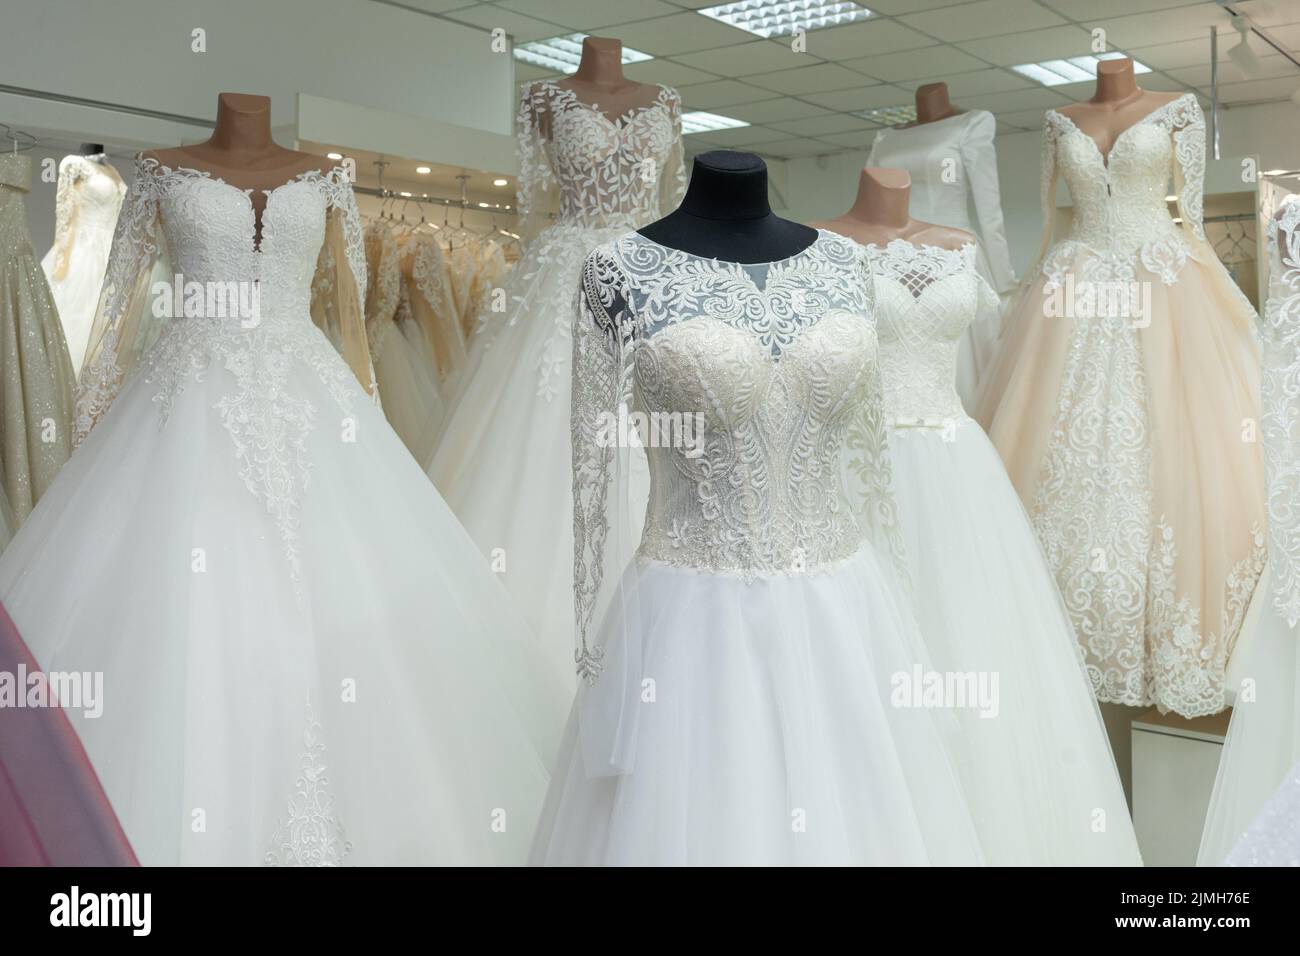 A close-up of a wedding dress against the background of other wedding dresses in a bridal salon Stock Photo